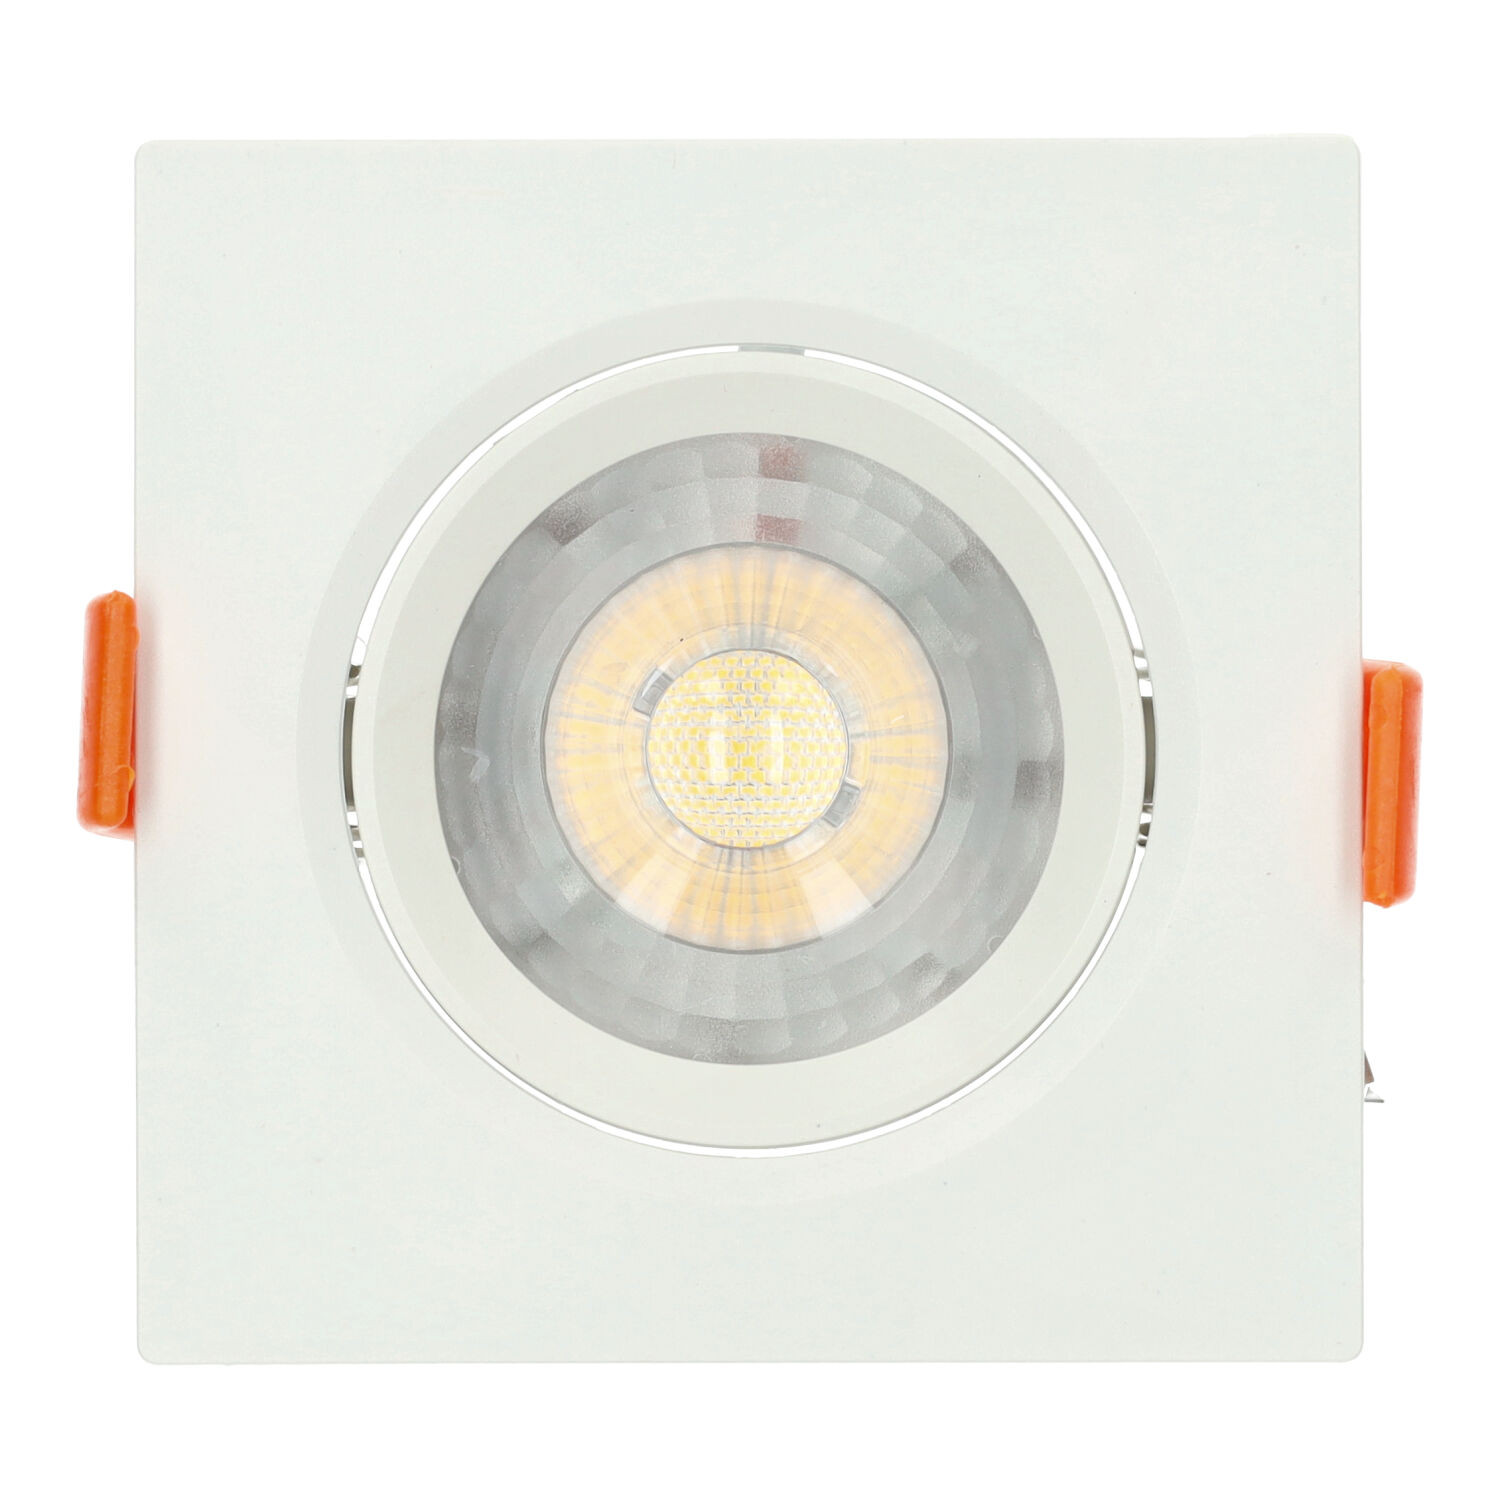 Downlight LED 7W carré...